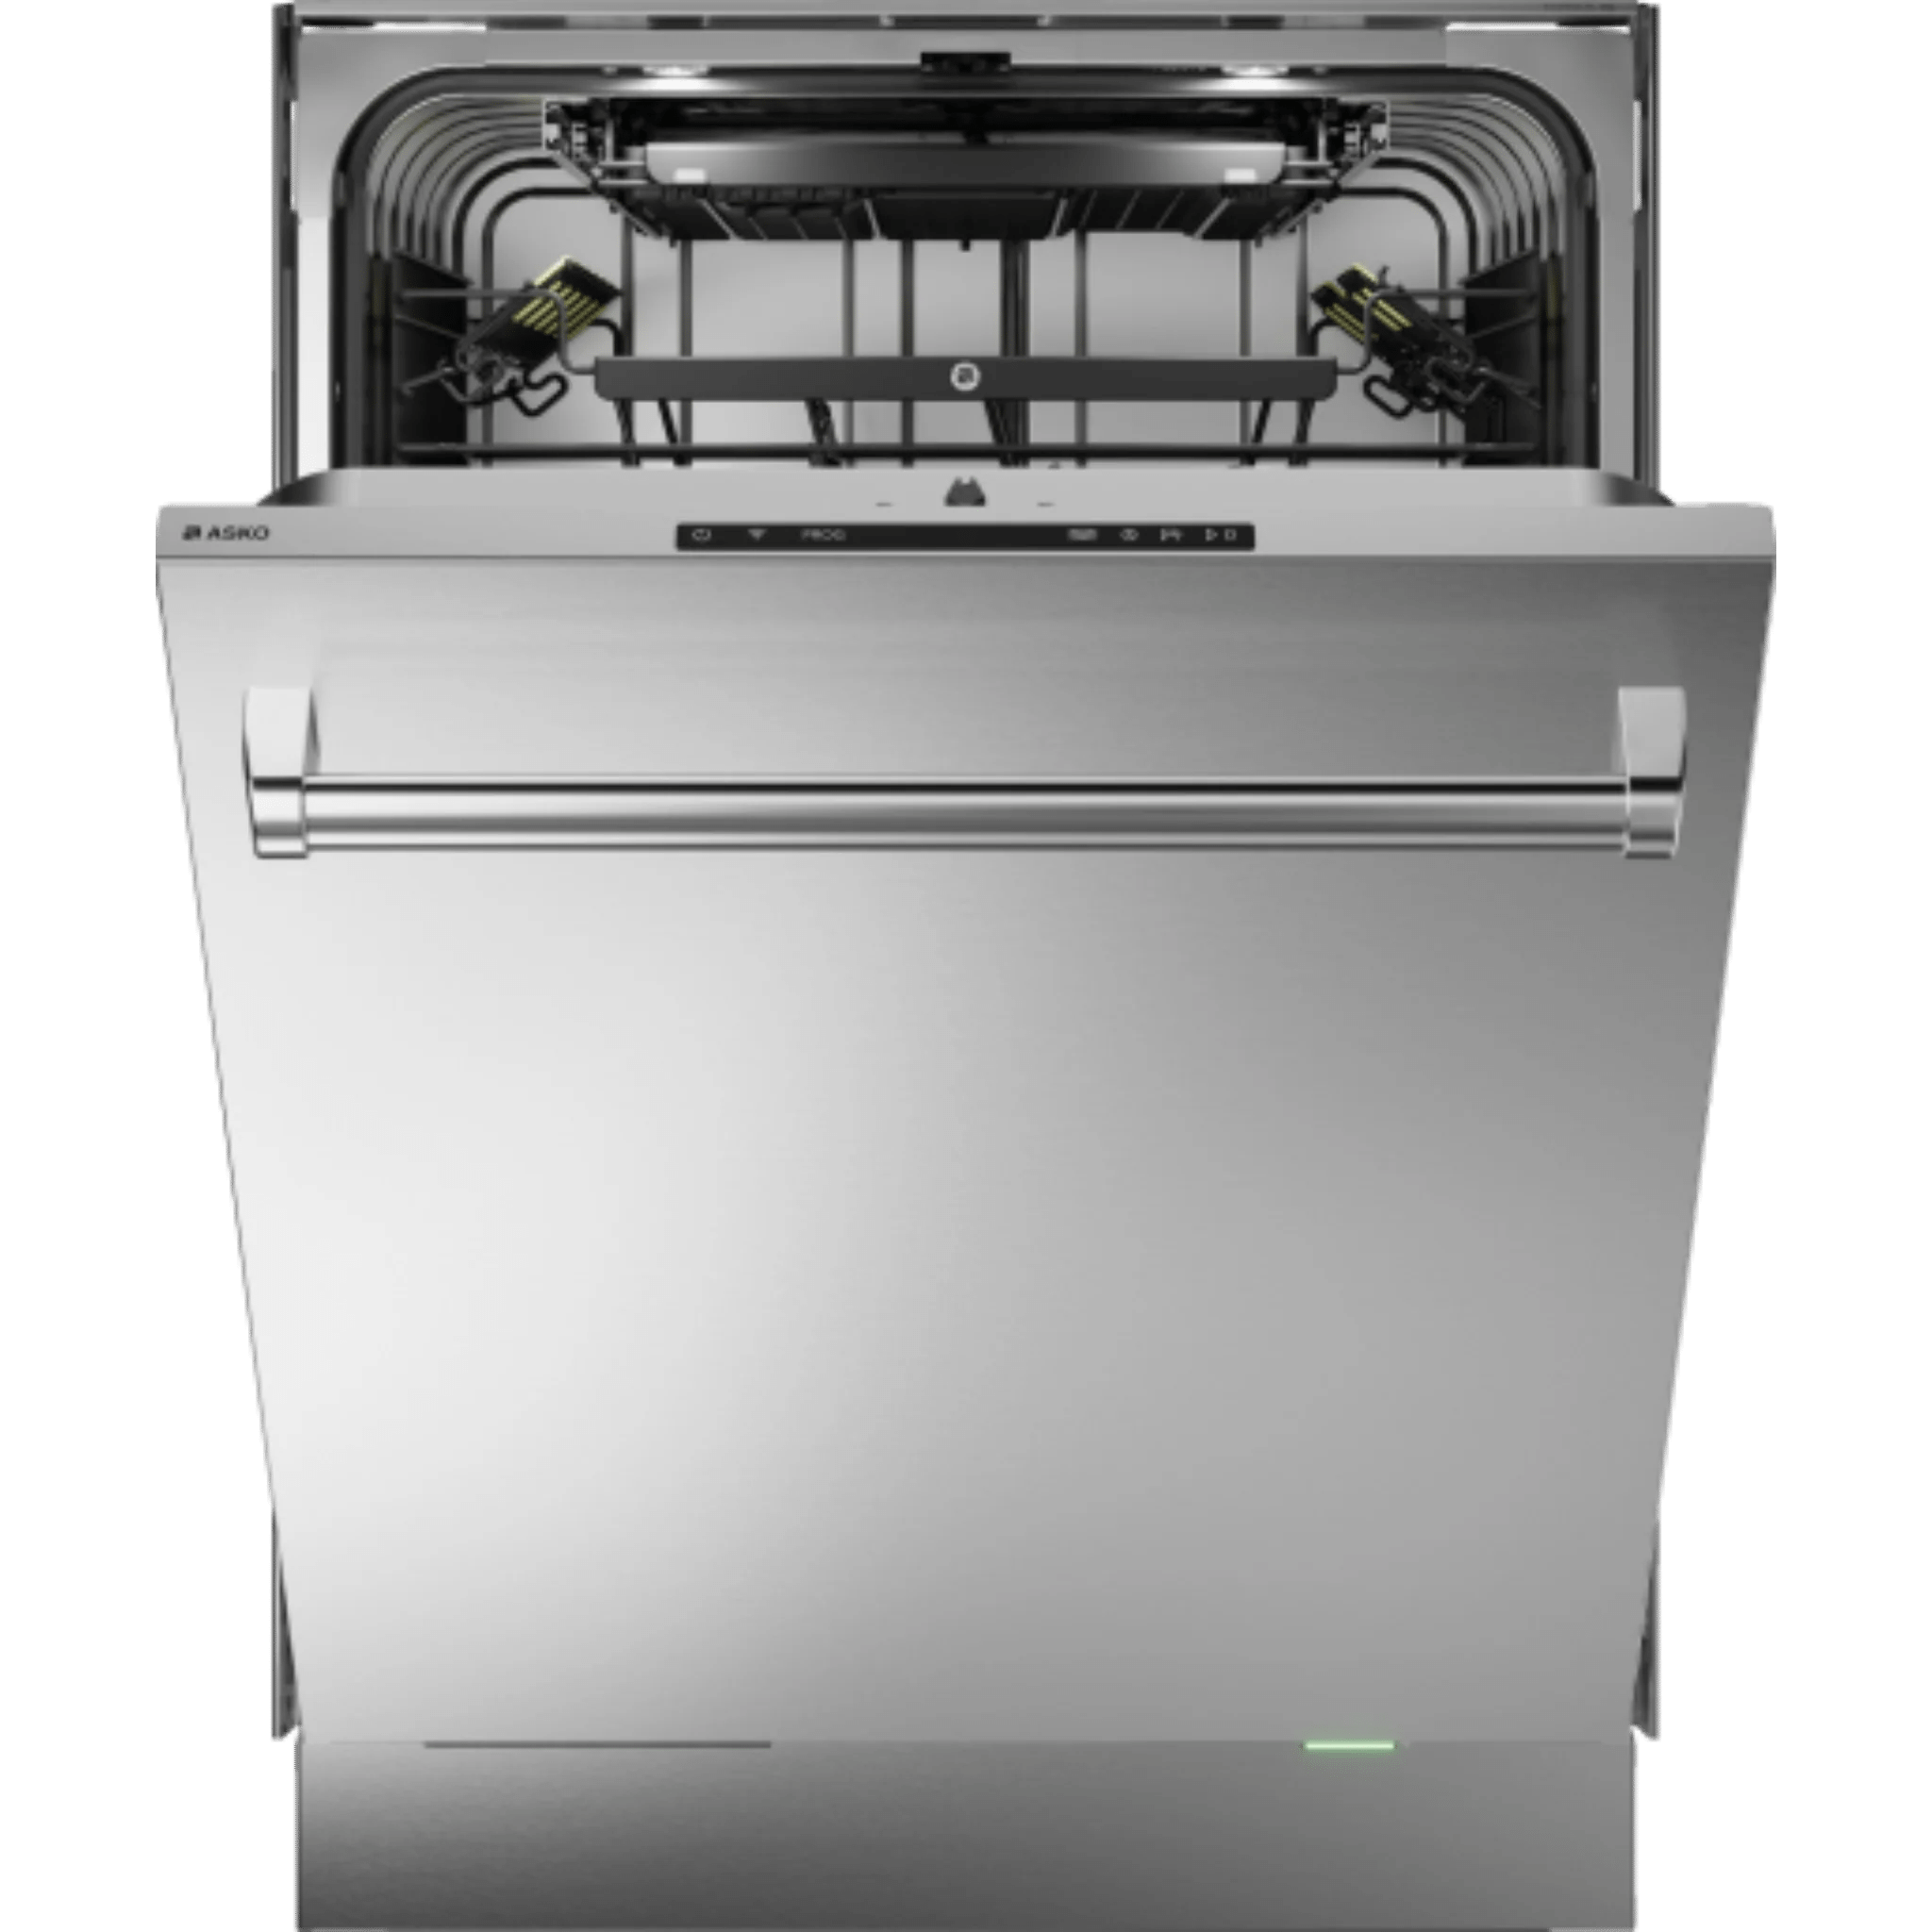 Asko Logic 24 Inch Wide 16 Place Setting Built-In Top Control Dishwasher with Pro Handle, XXL Tub, and Auto Door Open Drying™ Dishwashers DBI565PHXXLS Luxury Appliances Direct